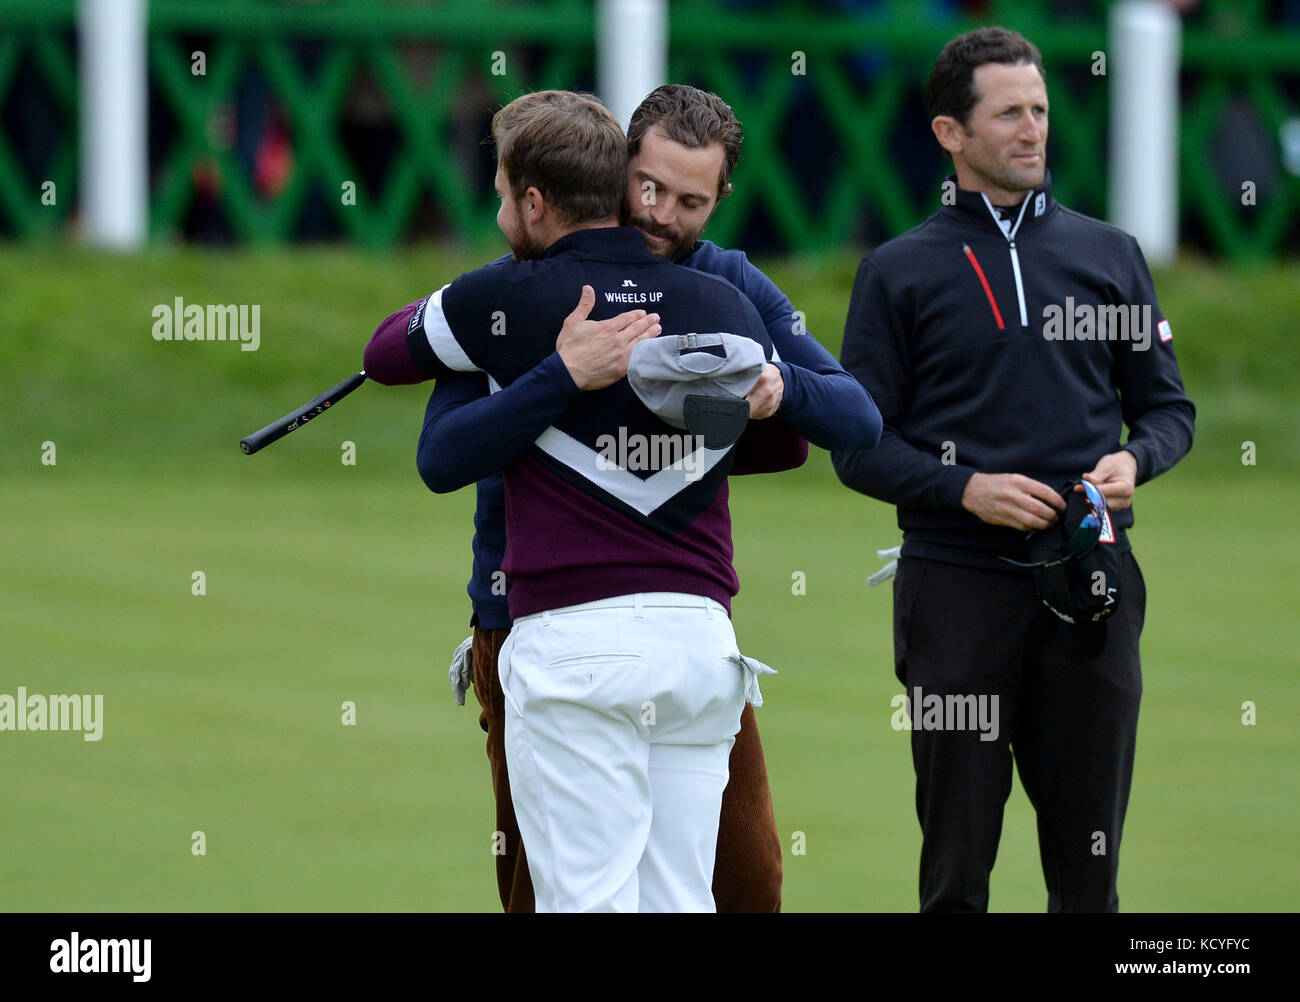 England's Tyrrell Hatton (left) recieves a hug from actor Jamie Dornan after winning the Alfred Dunhill Links Championship atSt Andrews Old Course, Fife. Stock Photo